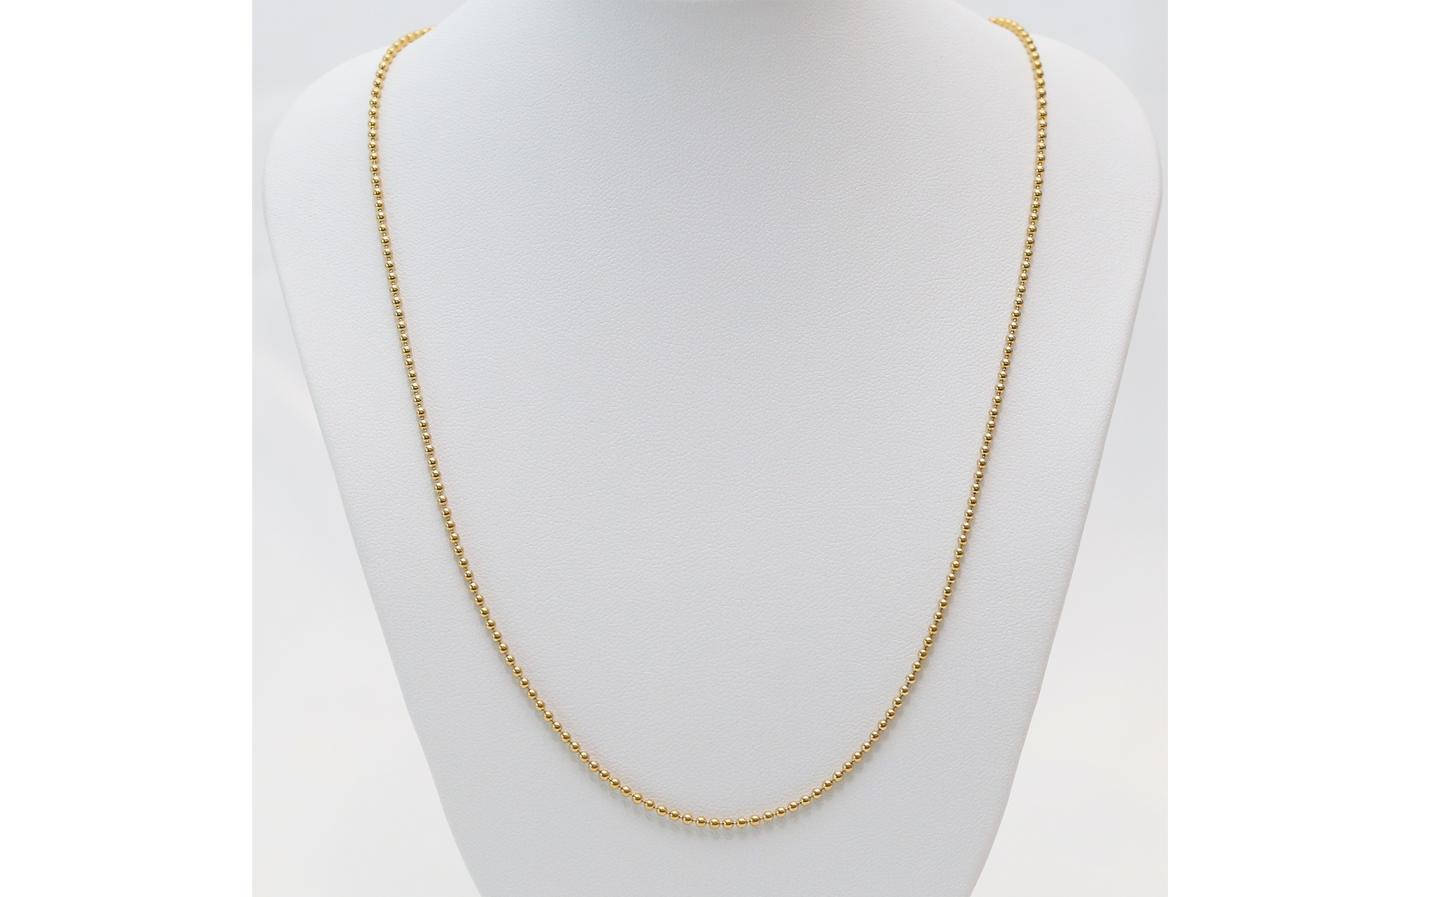 Uno Aerre 14k Yellow Gold Ball Chain, 18 inches - 6.4 grams